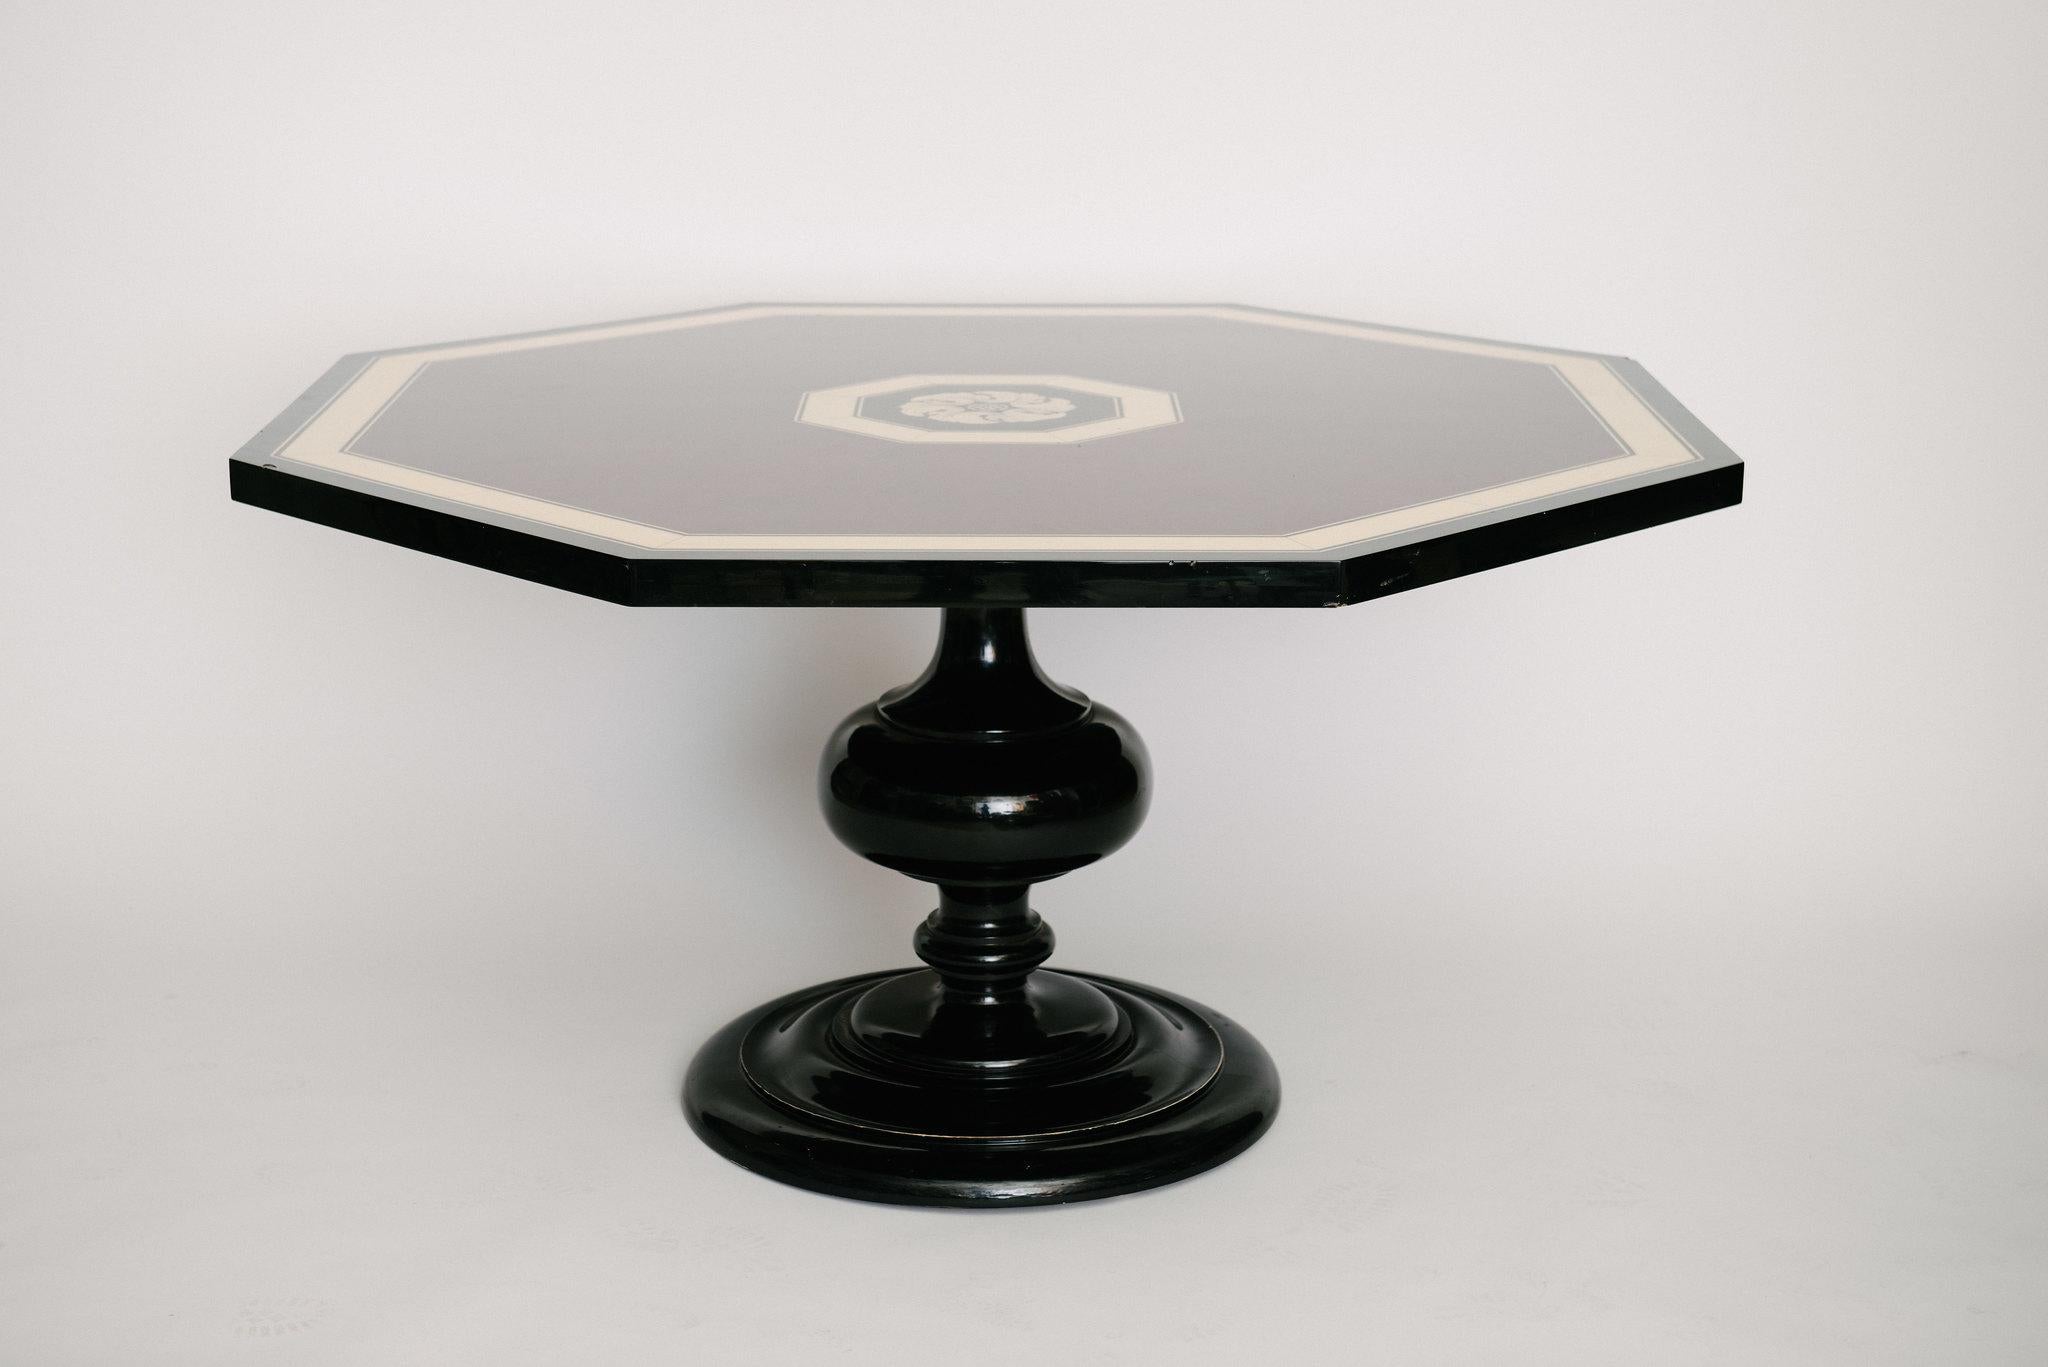 20th Century Art Deco Style Italian Lacquered Octagon Pedestal Table For Sale